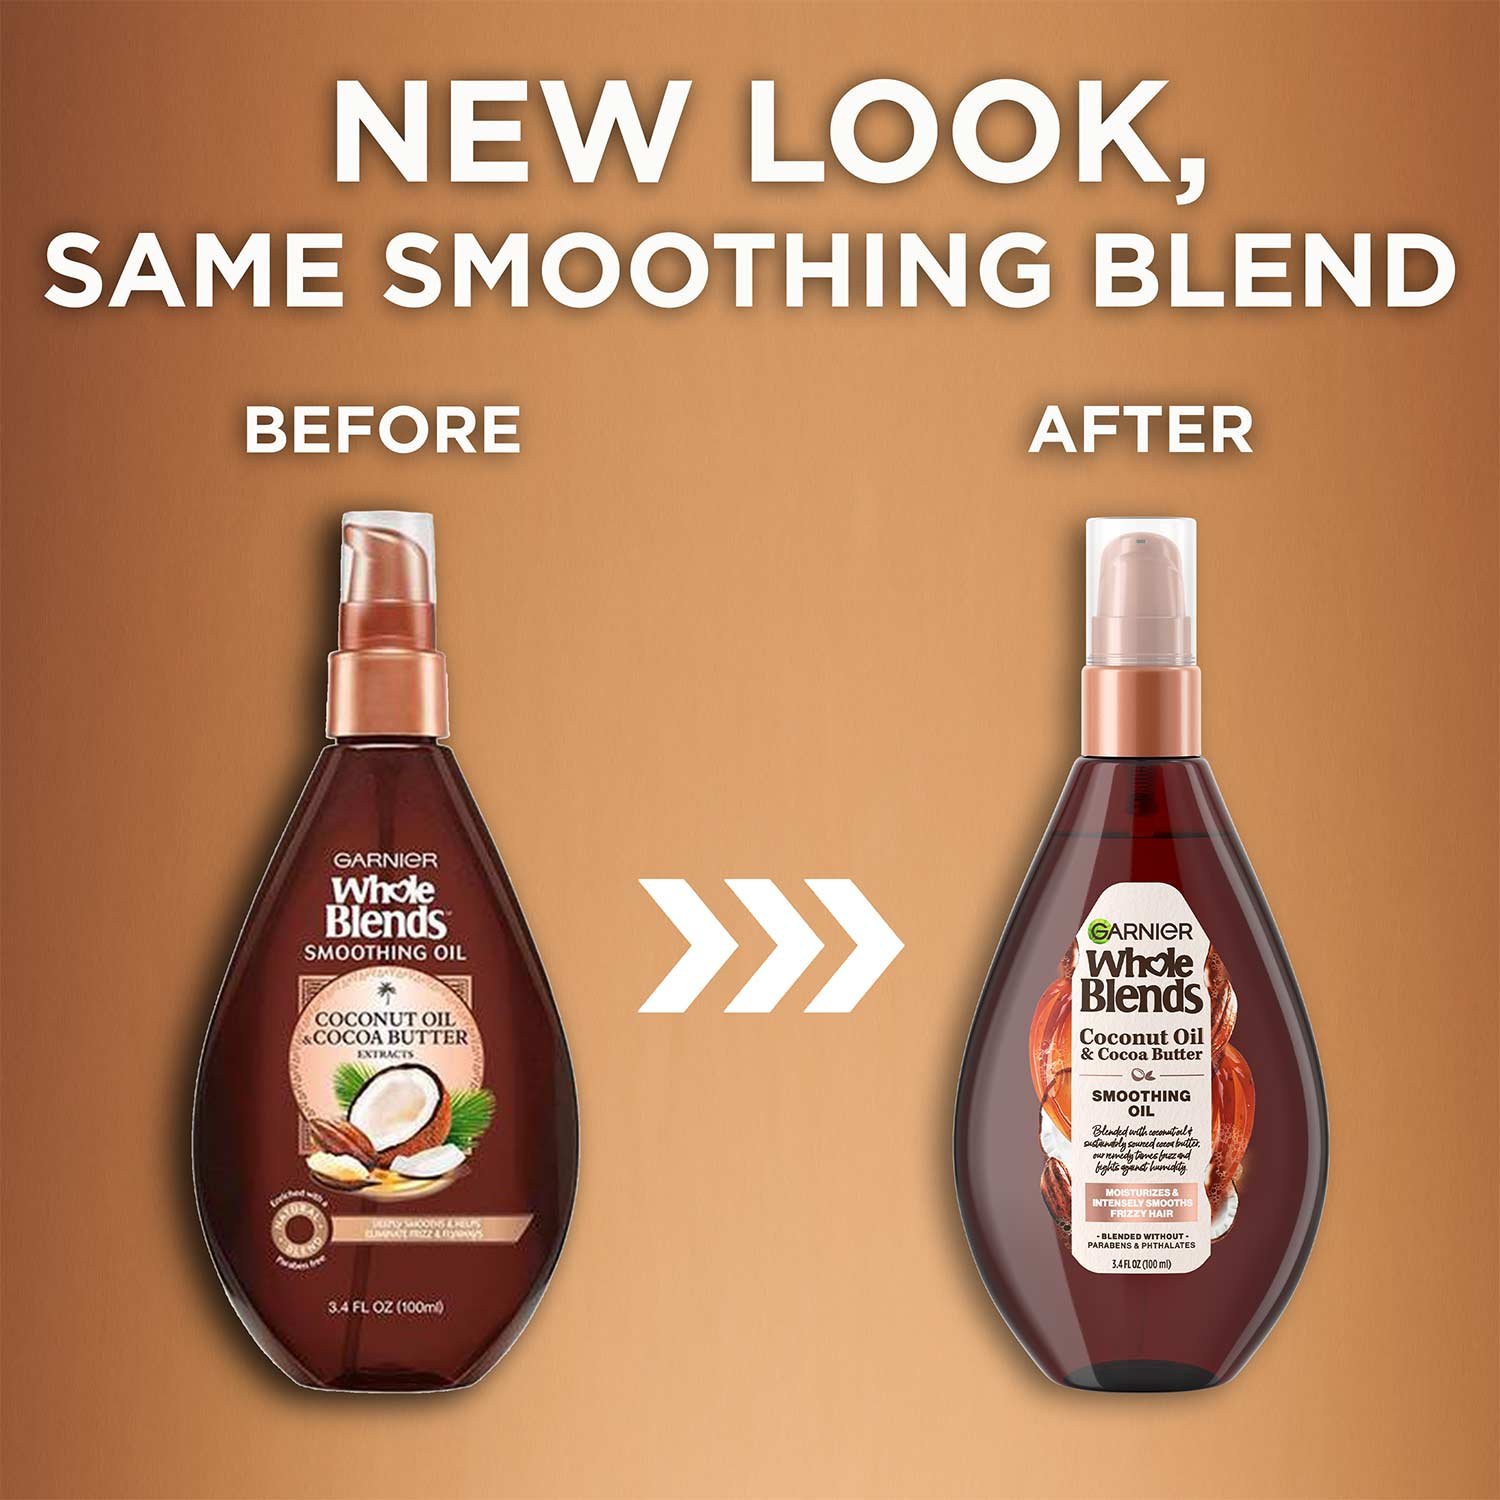 Whole Blends Coco Cocoa smoothing oil new look, same blend